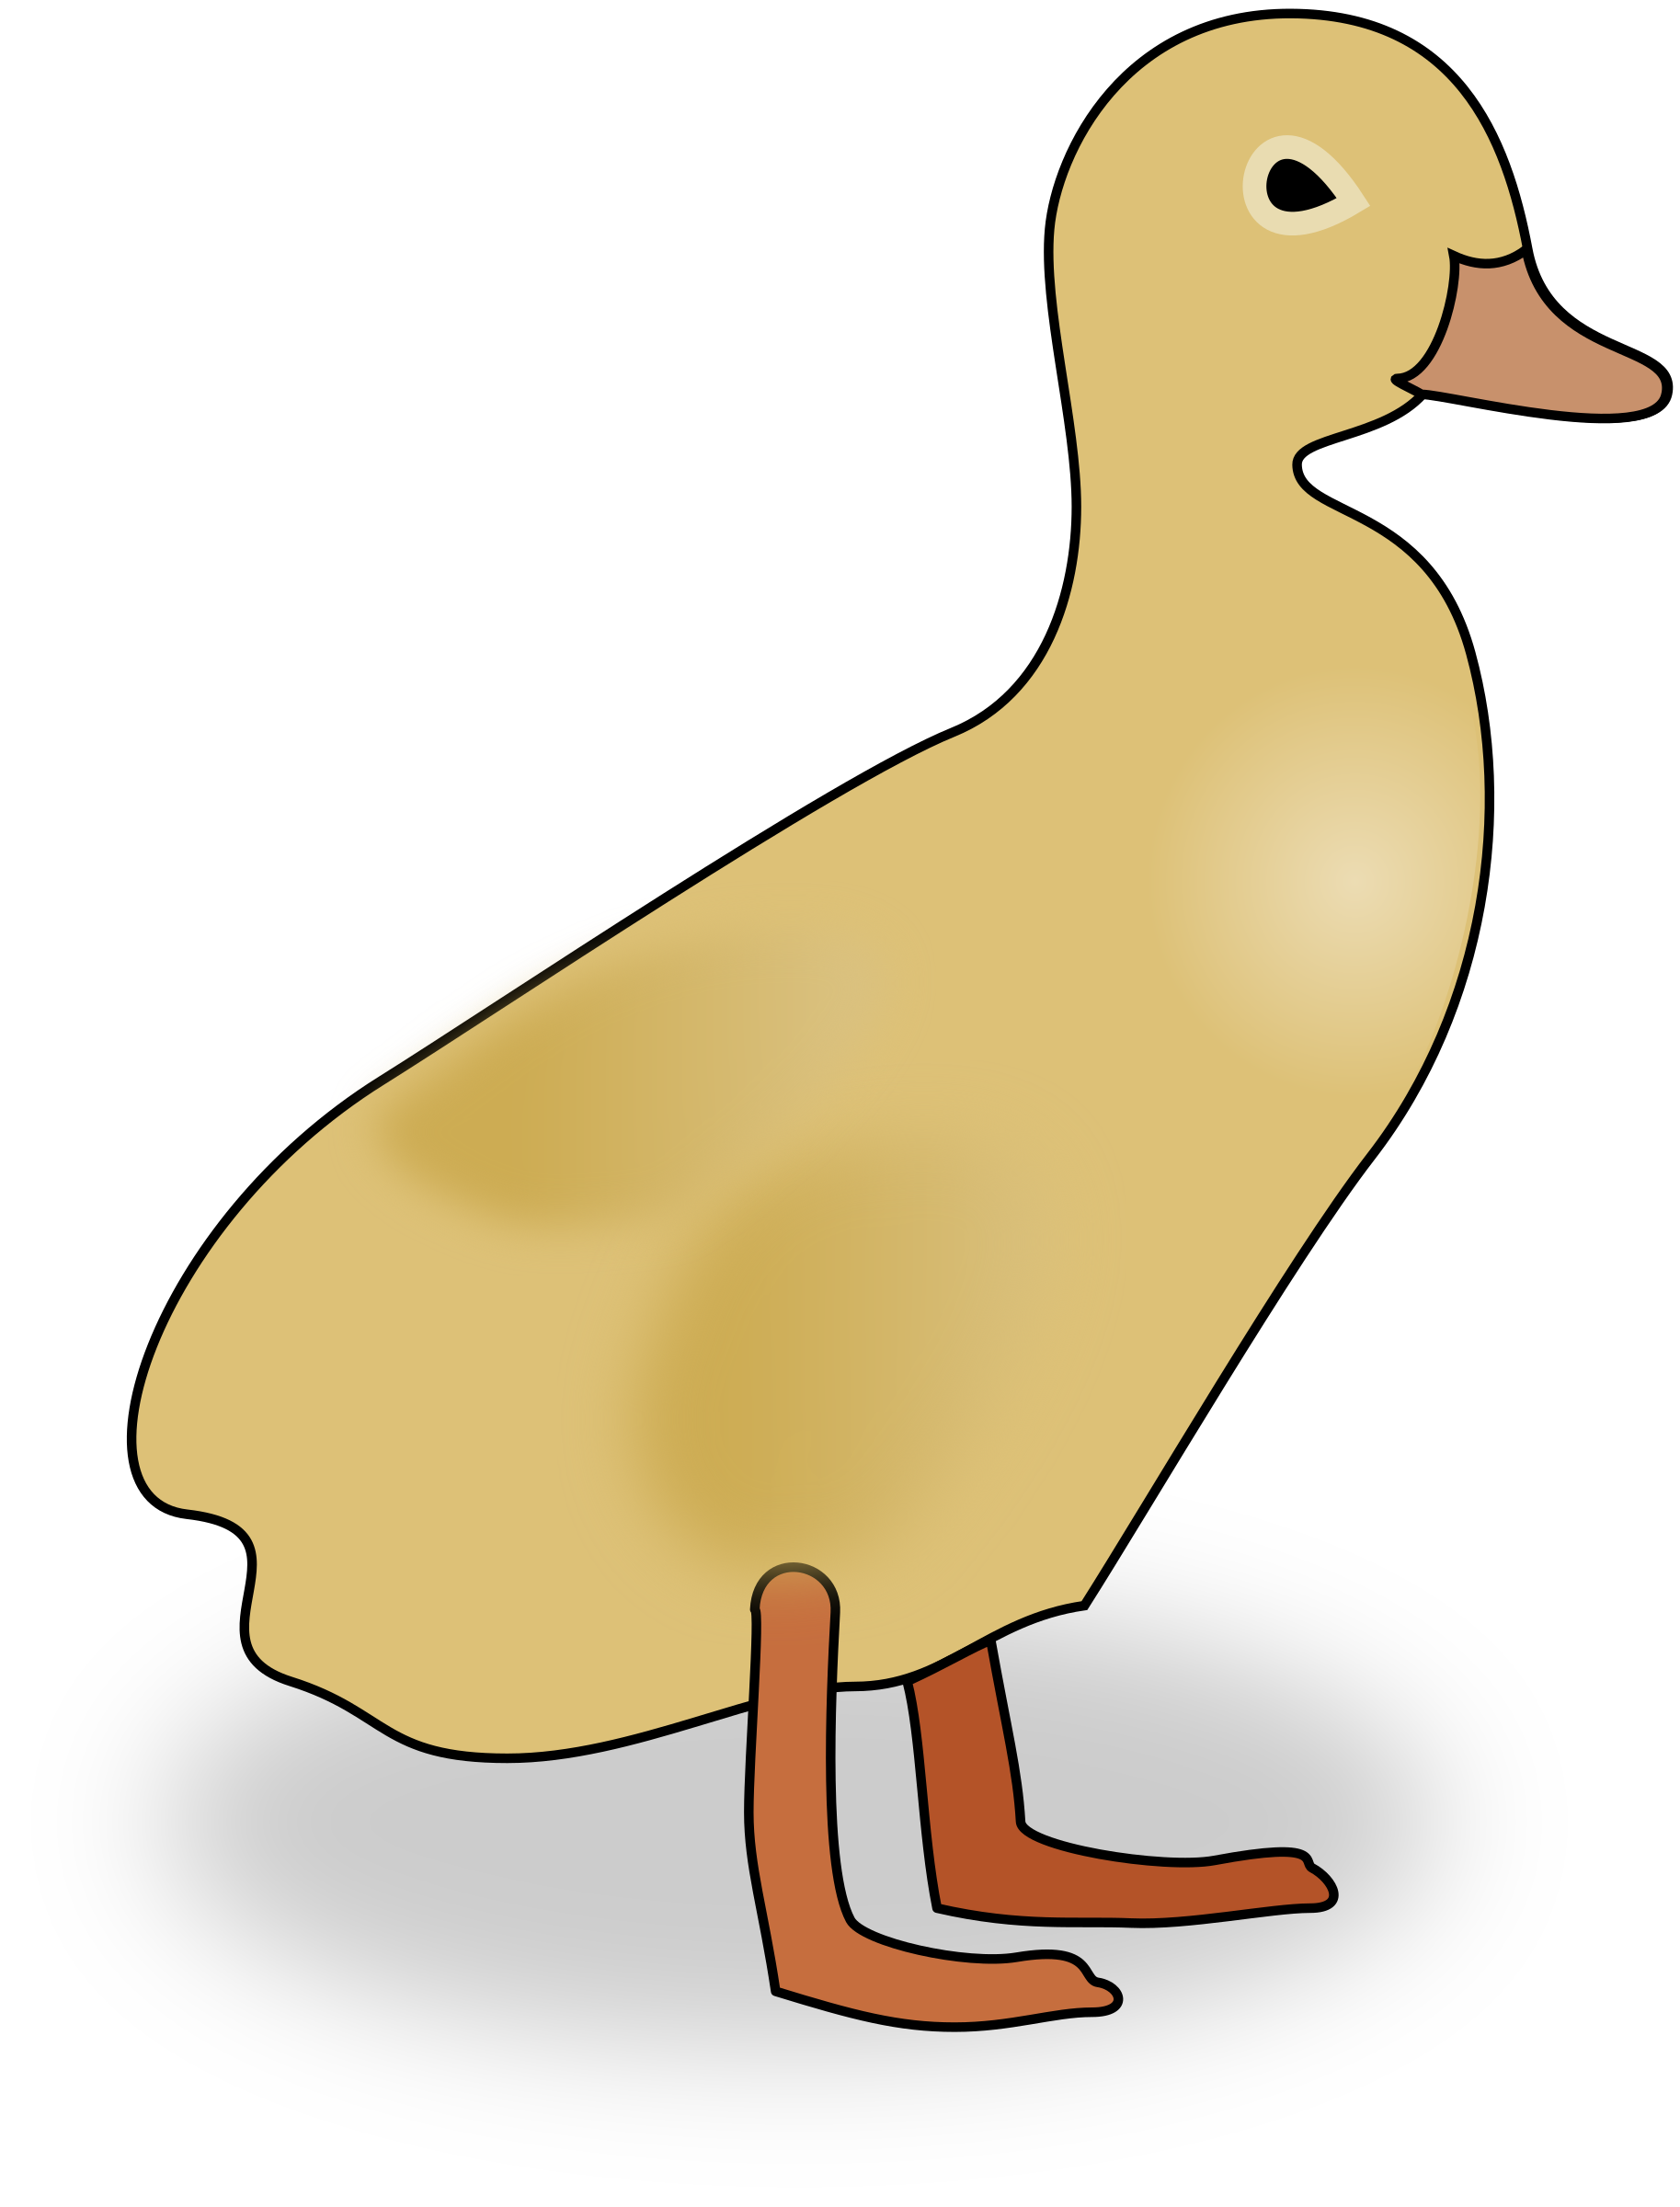 Ducks clipart sitting duck. Ugly duckling at getdrawings